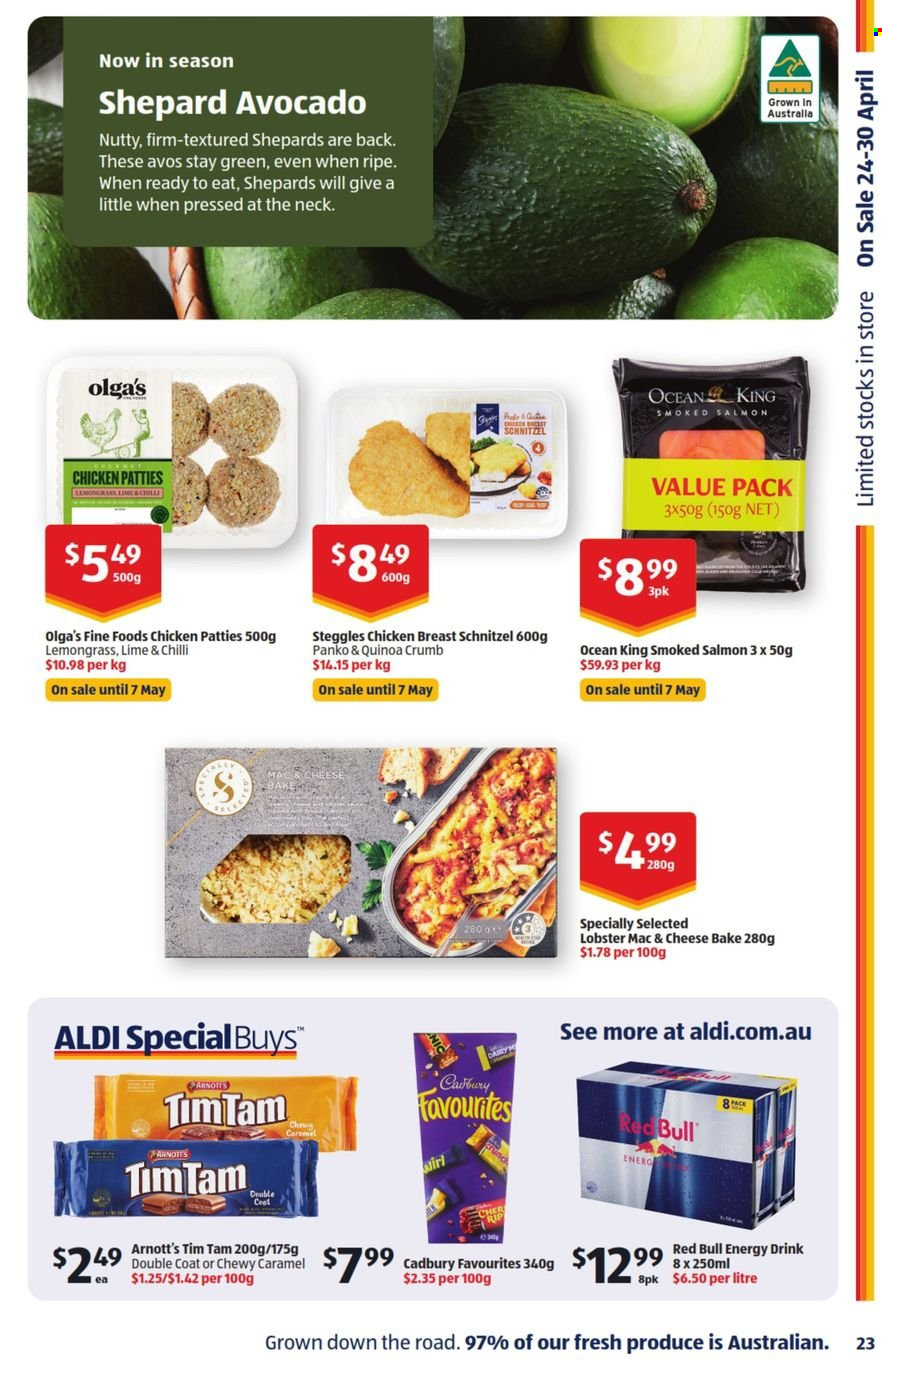 thumbnail - ALDI Catalogue - 1 May 2024 - 7 May 2024 - Sales products - avocado, salmon, smoked salmon, macaroni & cheese, schnitzel, ready meal, chicken breasts, chicken patties, Tim Tam, Cadbury, chocolate candies, caramel, energy drink, Red Bull, coat. Page 23.